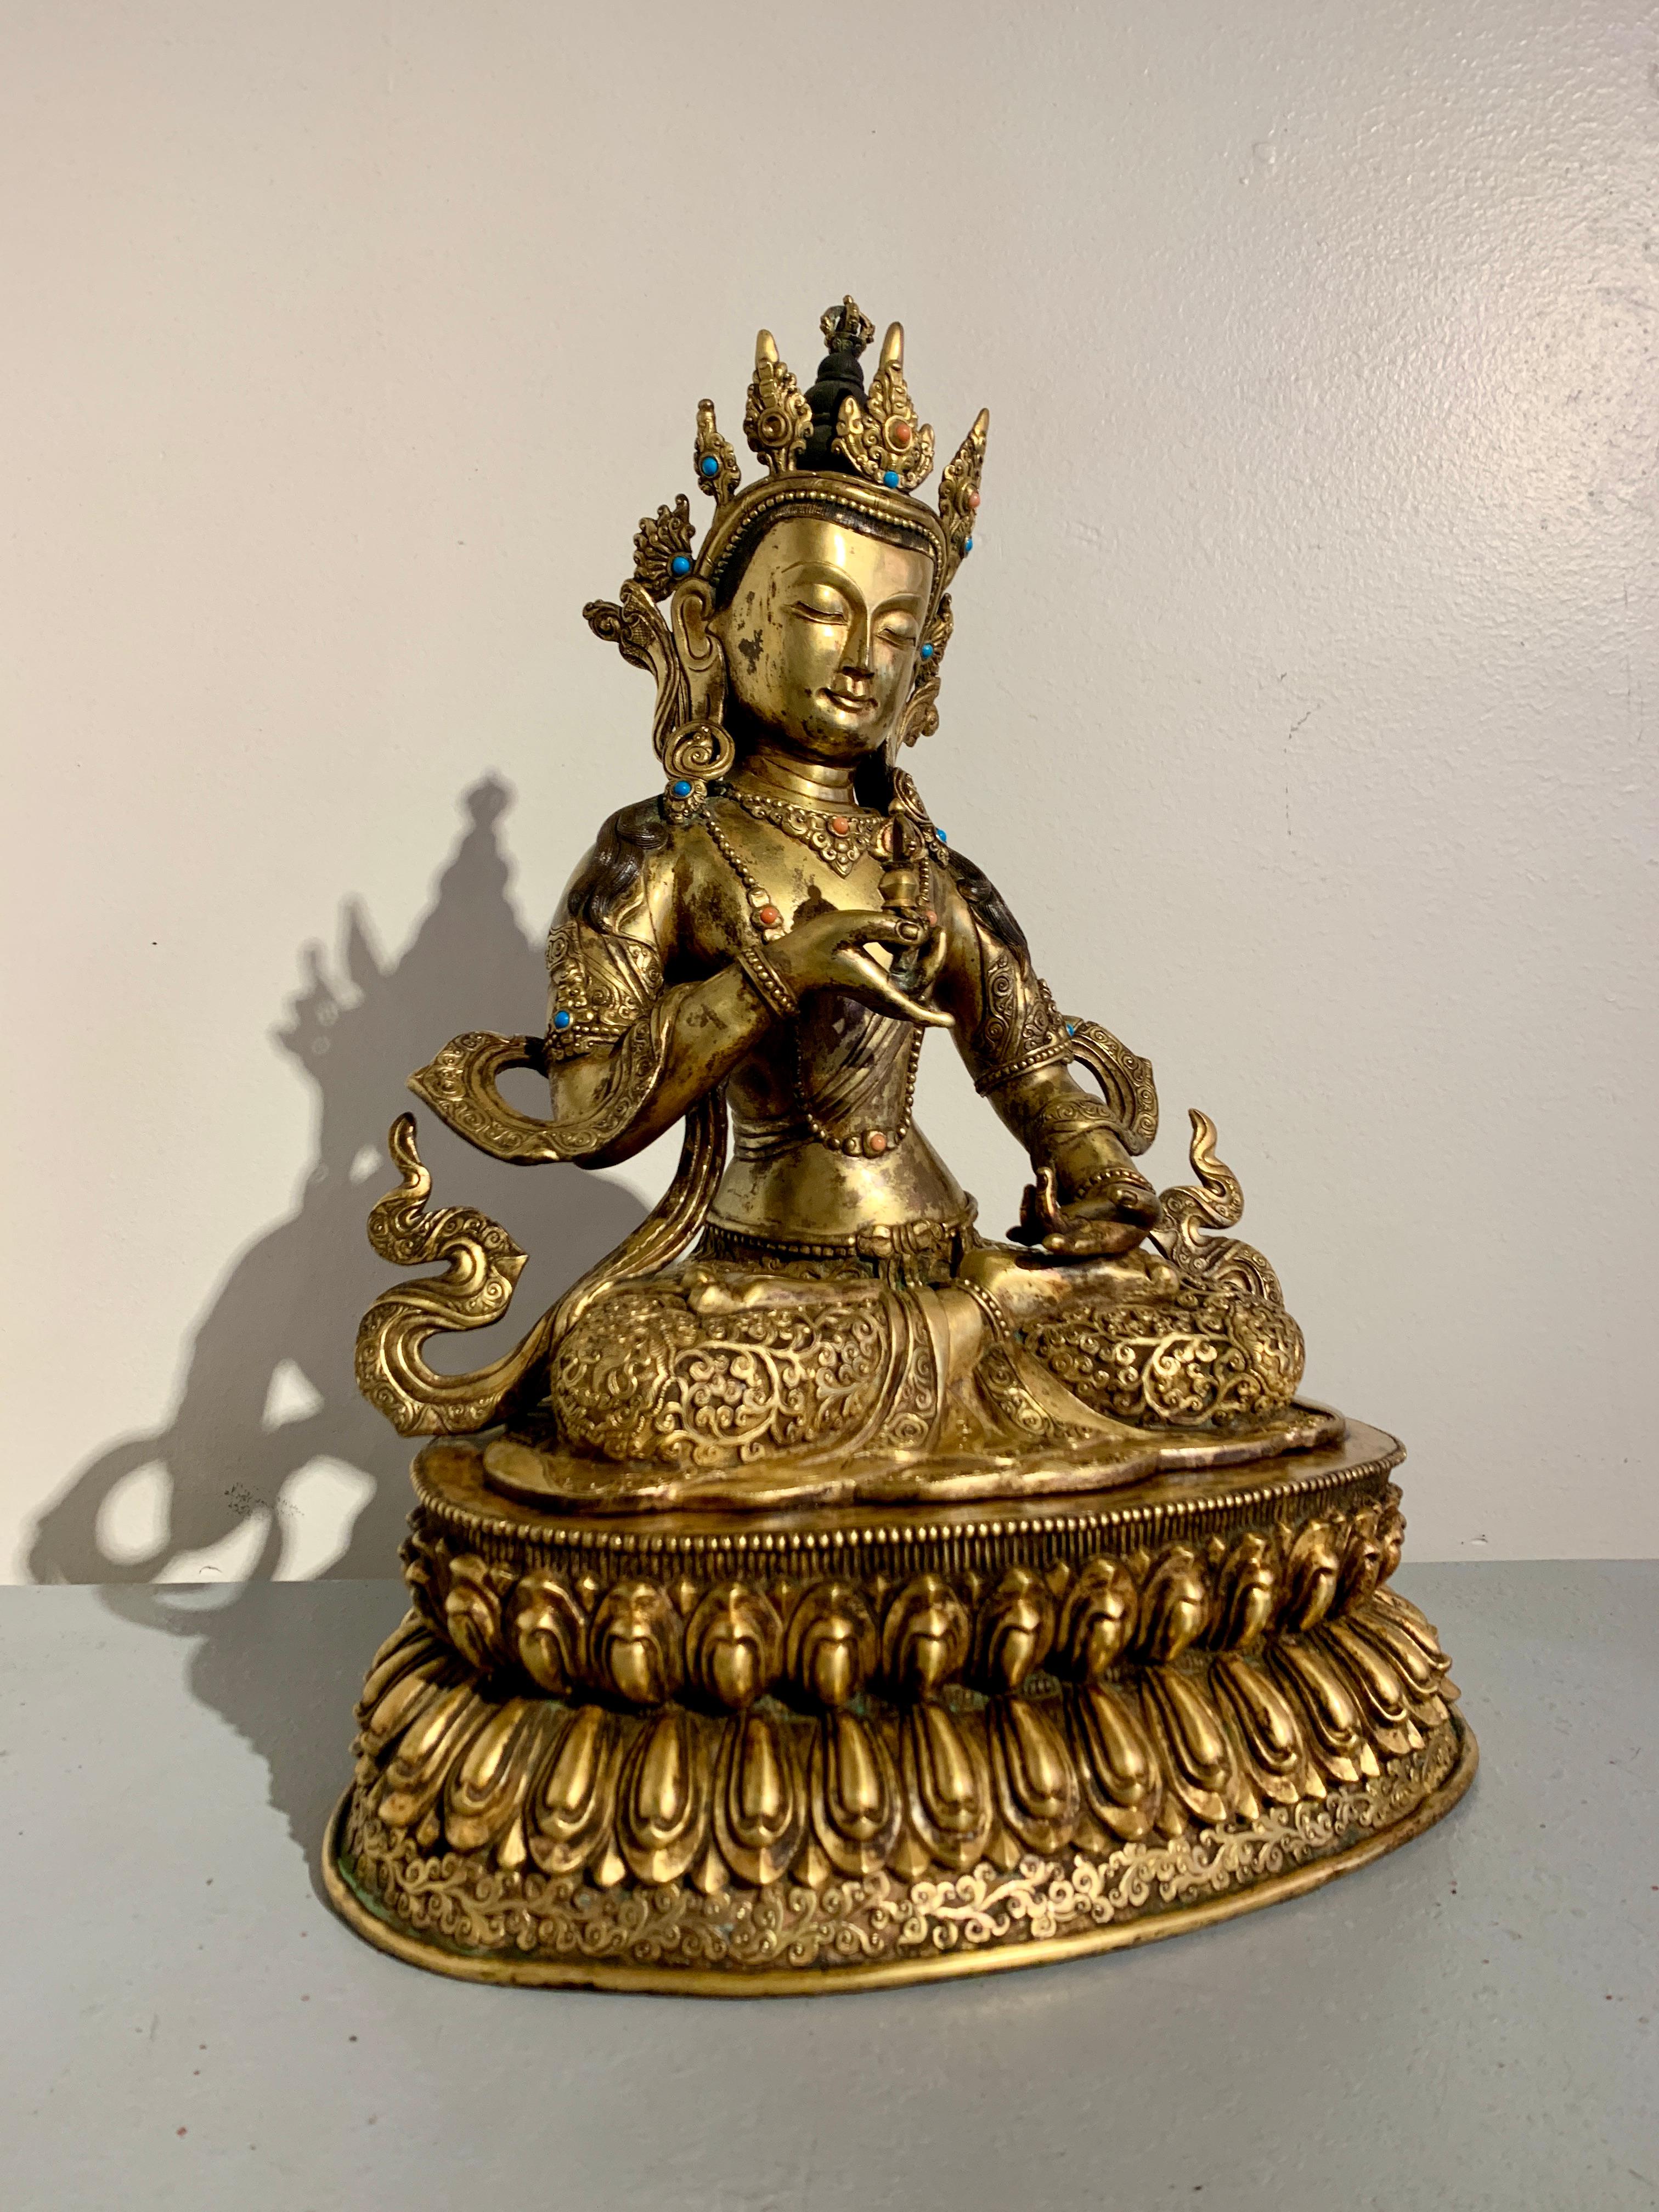 A large and impressive vintage gilt bronze figure of the tantric Buddha Vajrasattva, the Diamond Thunderbolt, mid 20th century, Nepal. 

Crafted of cast and richly gilt bronze, Vajrasattva sits in vajrasana, or full lotus position, his torso